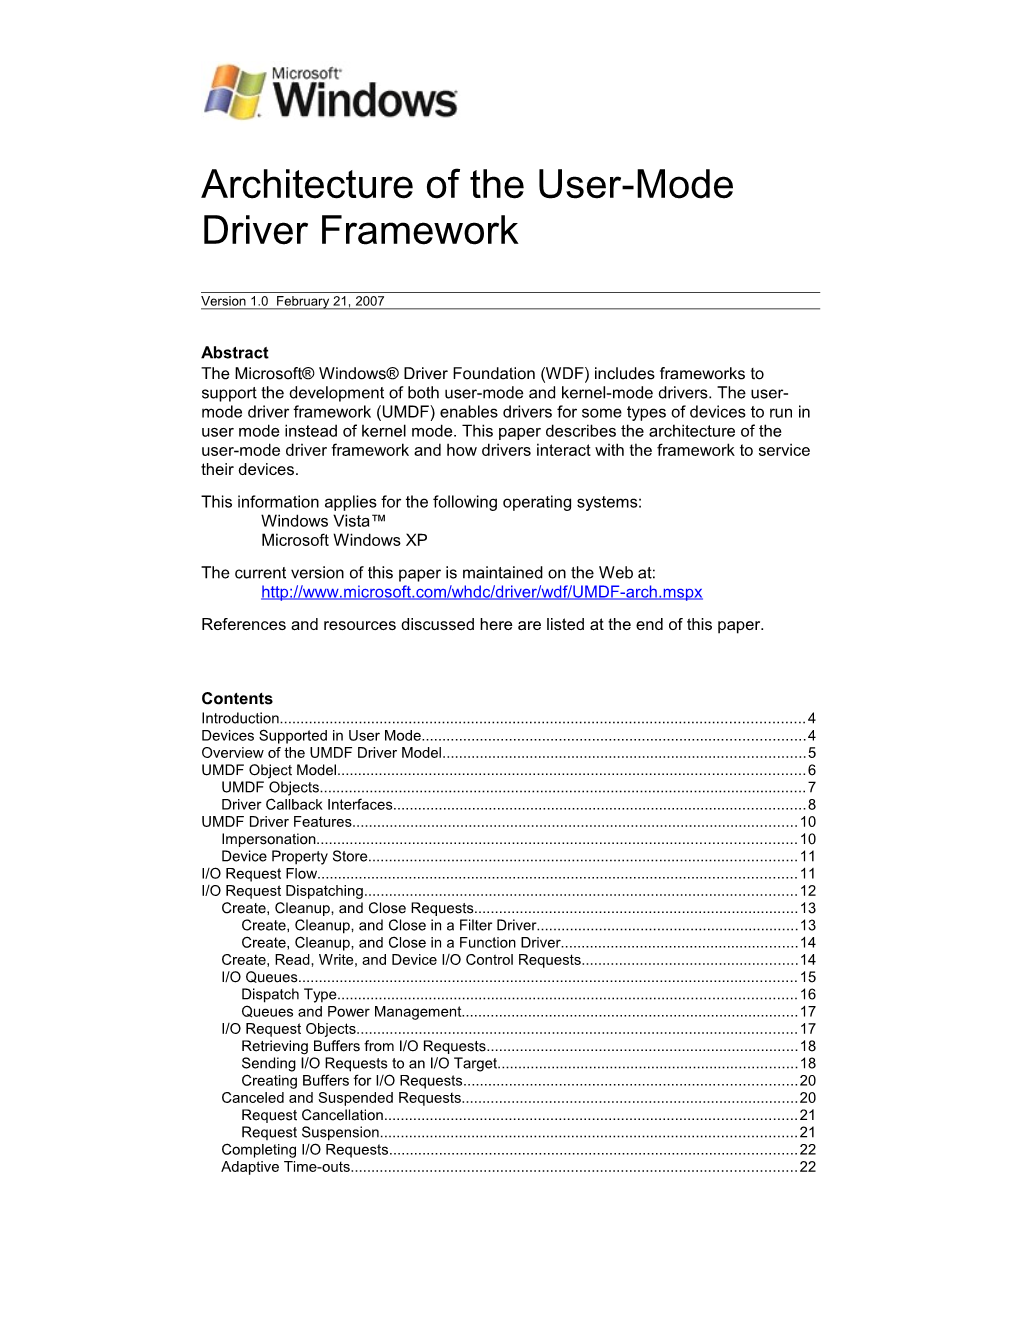 Architecture of the User-Mode Driver Framework